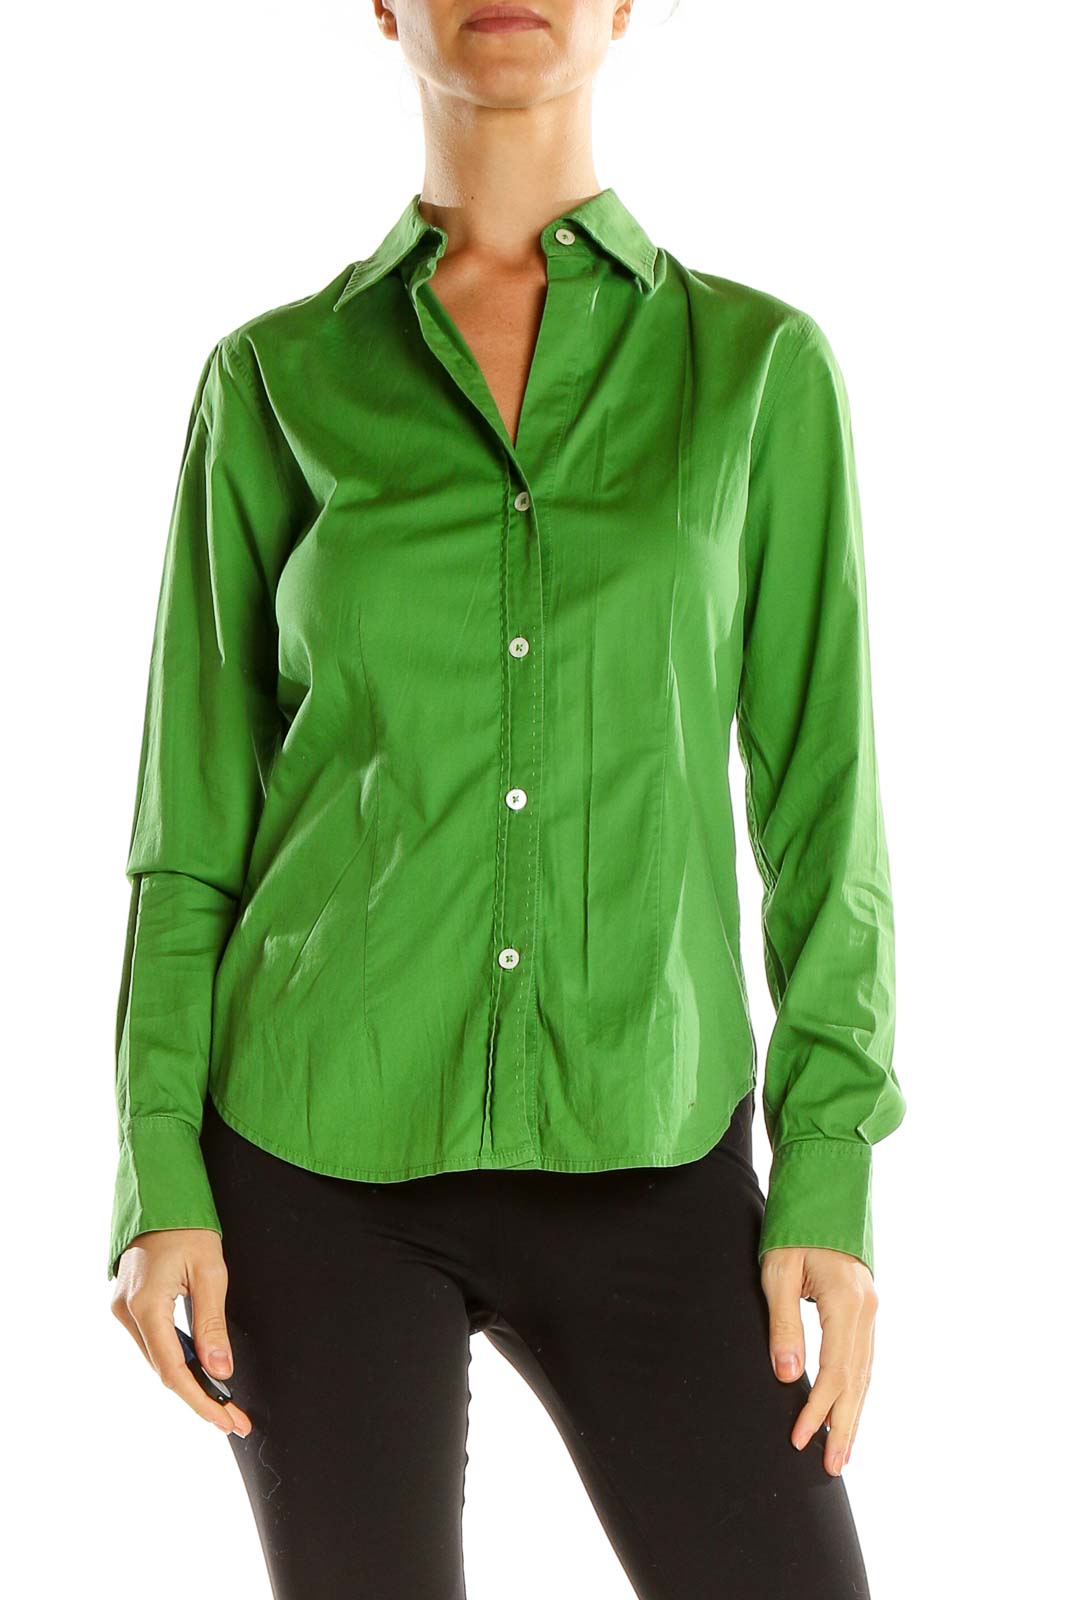 Green Formal Top Front